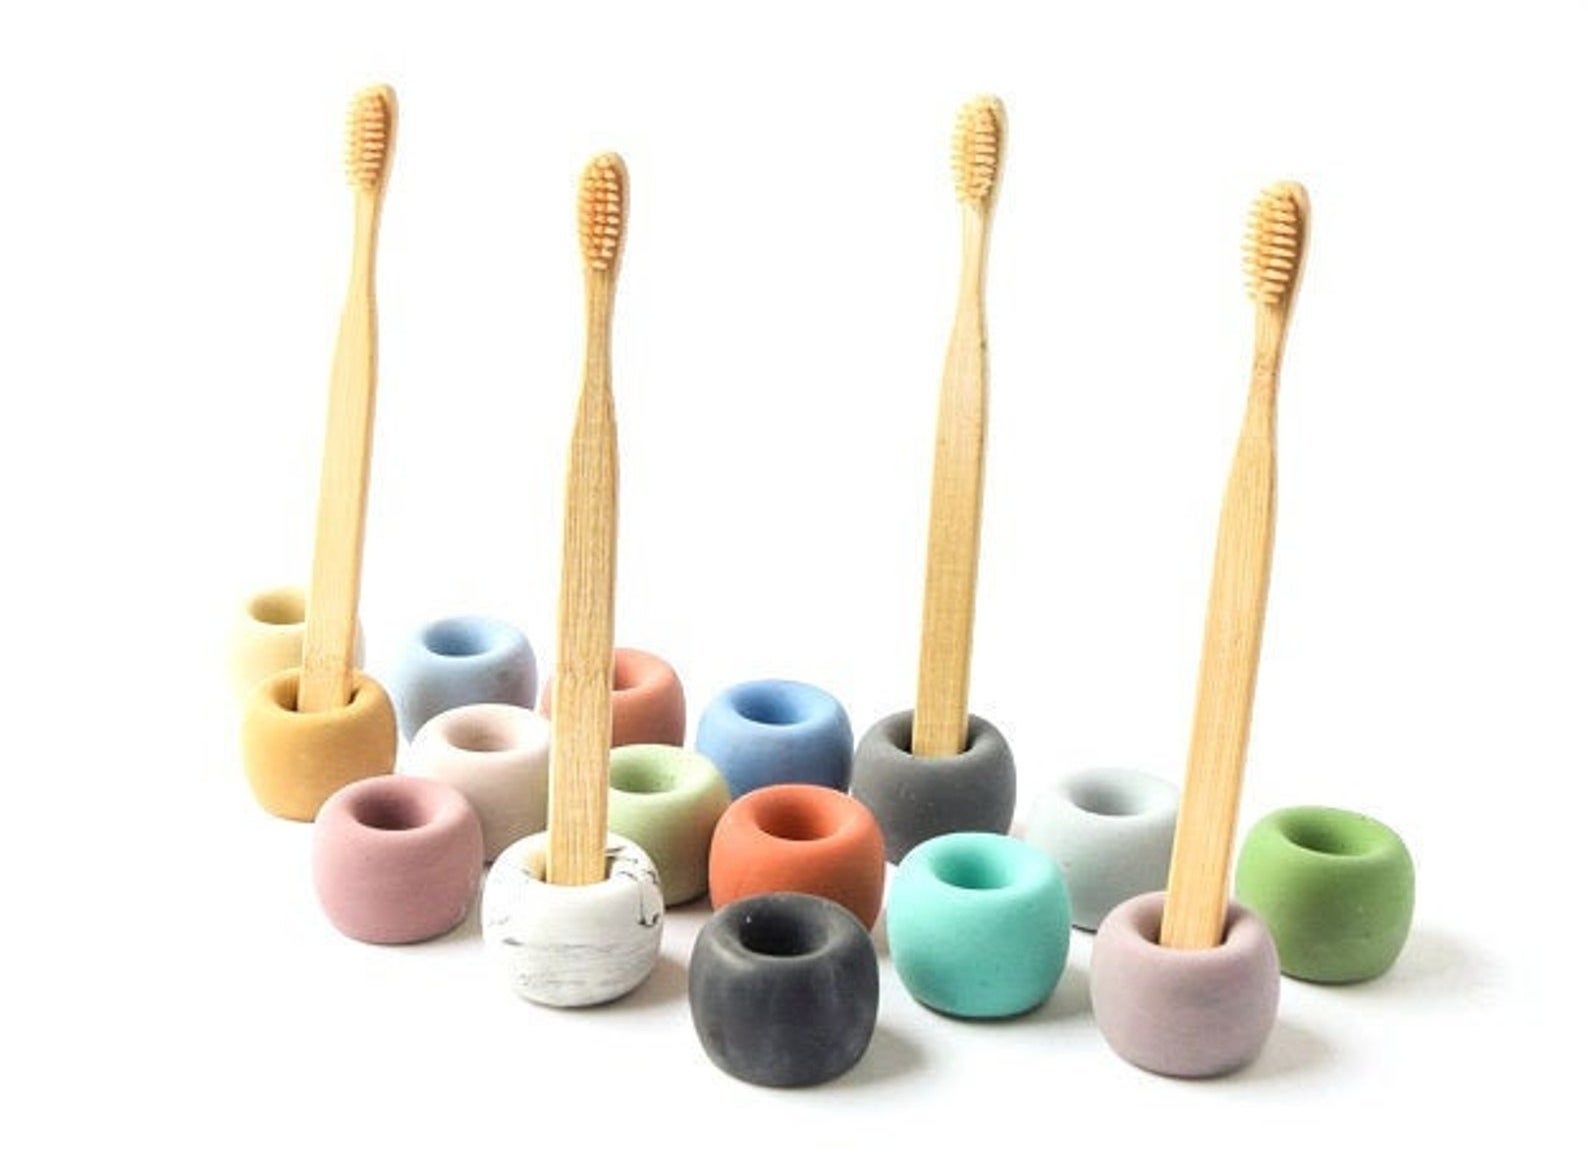 The toothbrush holders in many different colors holding bamboo toothbrushes